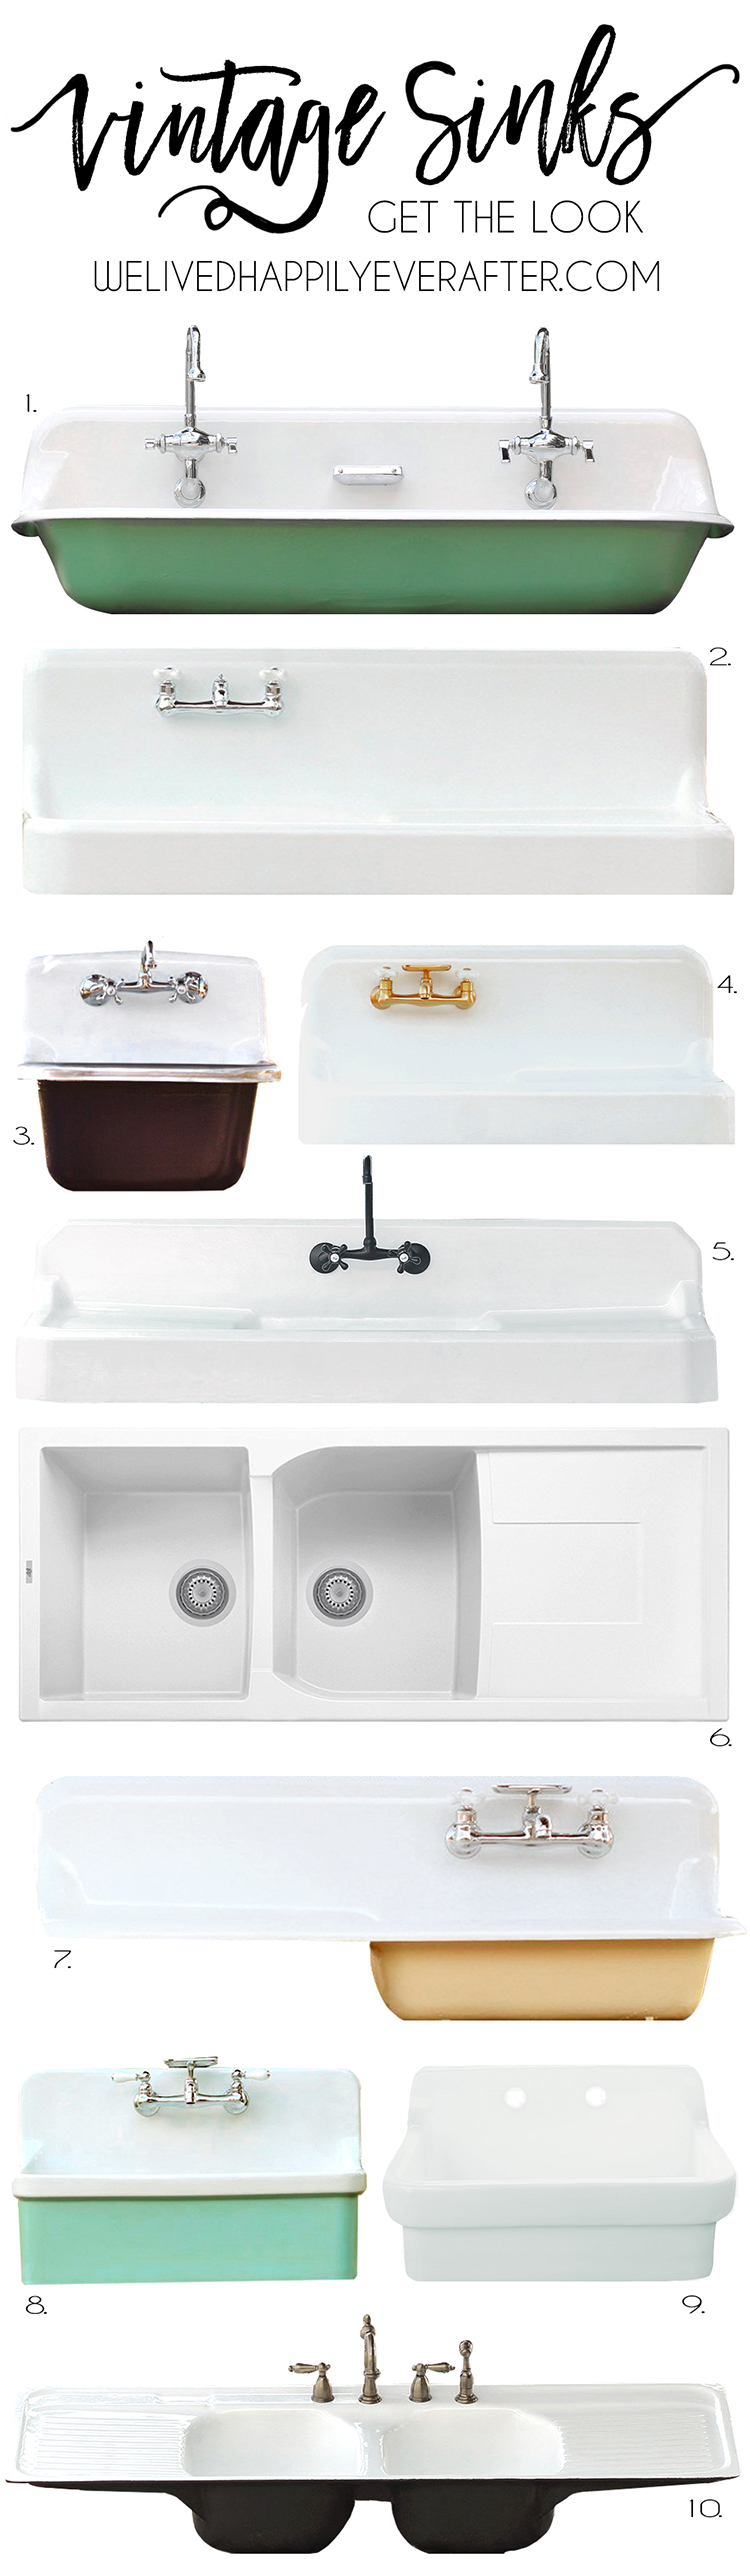 Vintage Looking Farmhouse Sinks For Your Home Apron Drainboard Style Hannahsfarmhousefavs We Lived Happily Ever After,How To Cook A Prime Rib Steak In The Oven